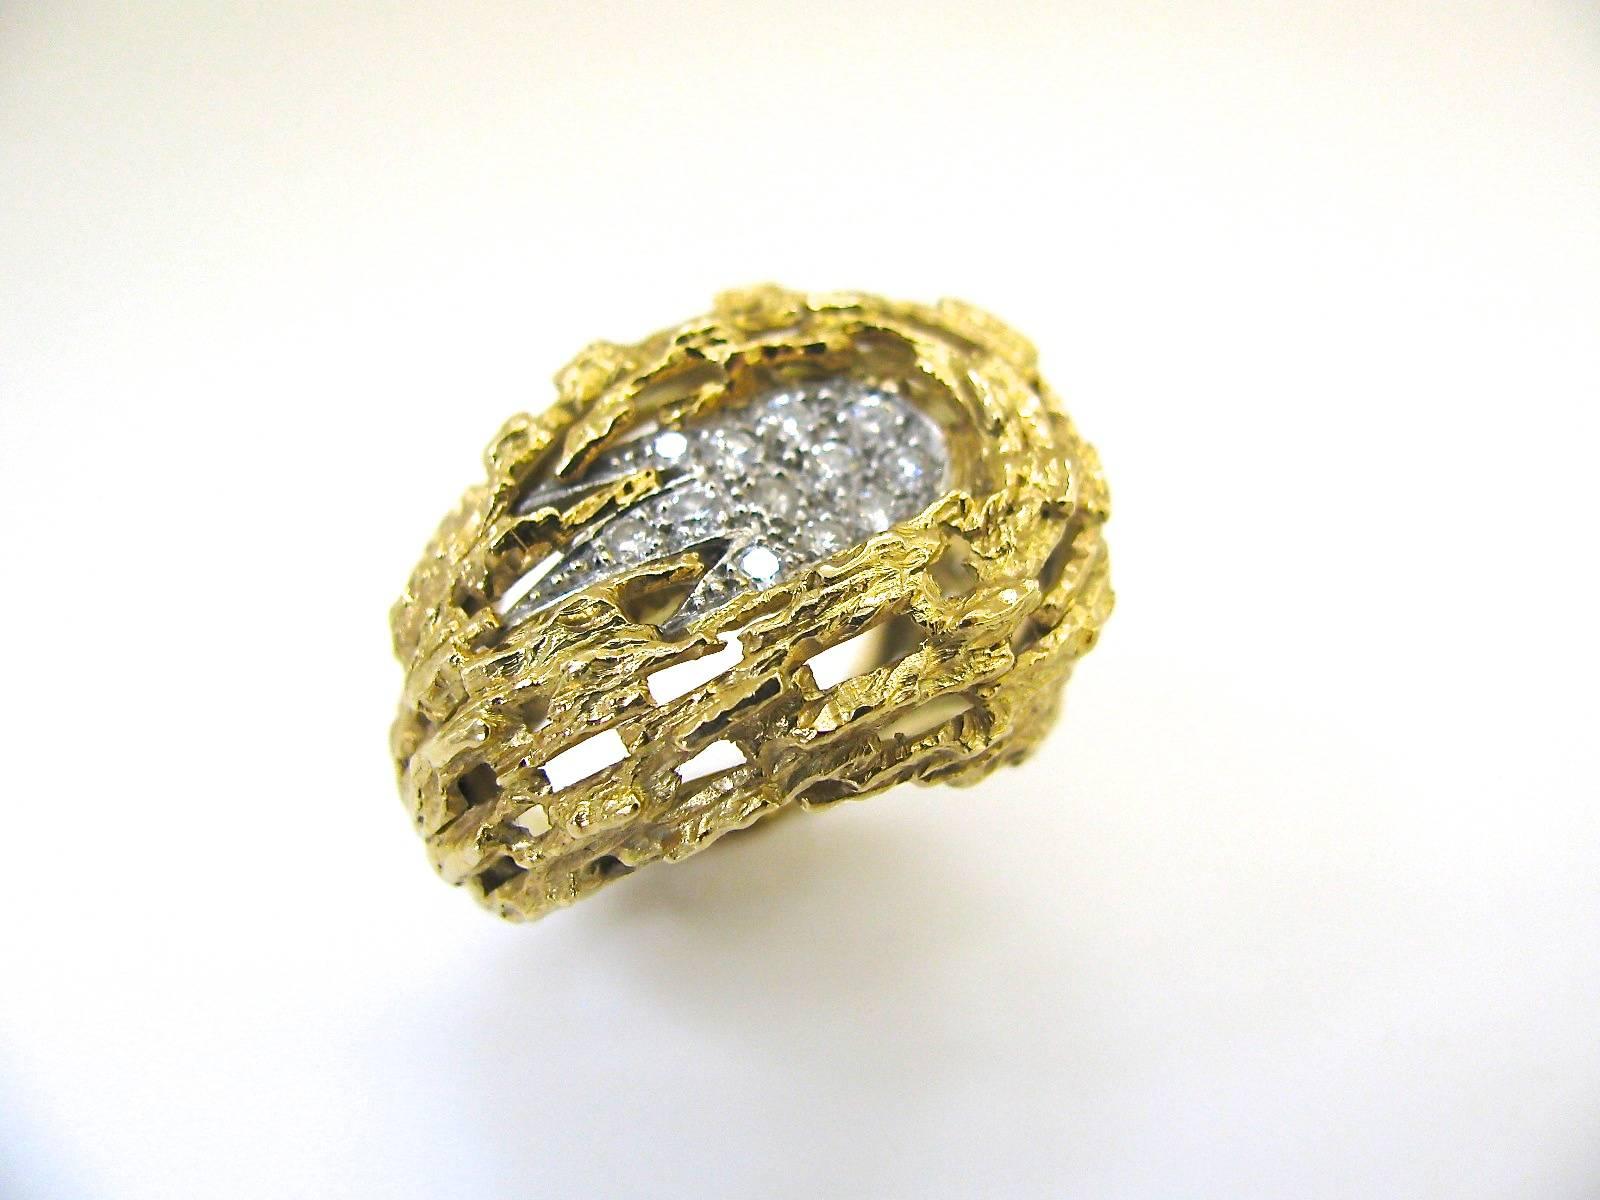 A stylish ring by Andrew Grima. The 18k yellow gold freeform ring with twelve pave set white diamonds. ( approximately .50cts) A great day to night ring. Just understated enough to wear with clients, but showy enuf for dinner. A wonderful go-to